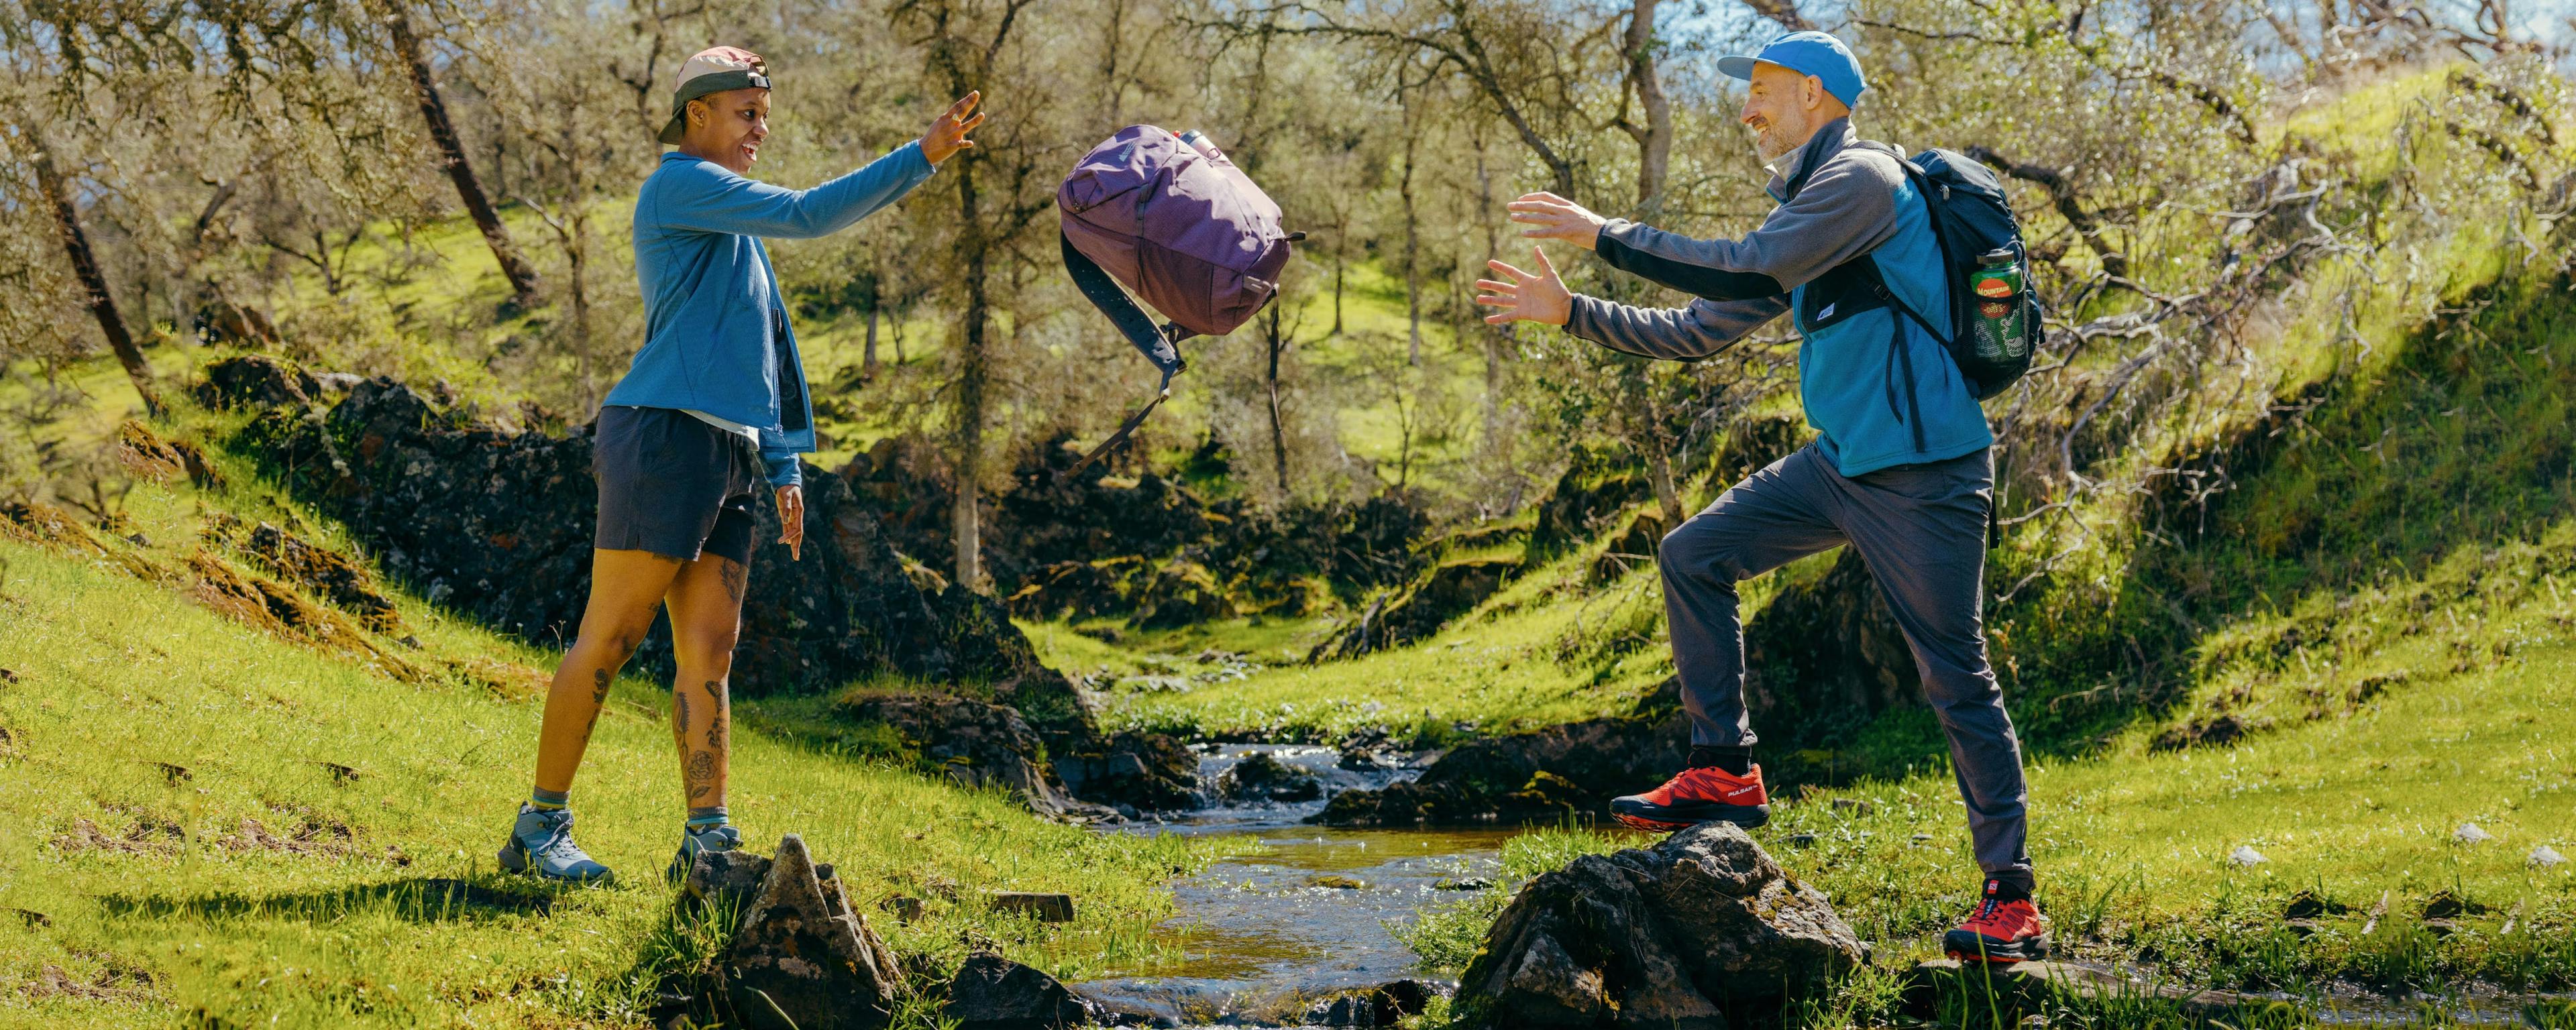 Two hikers crossing a small stream; one hike is tossing a backpack to the other